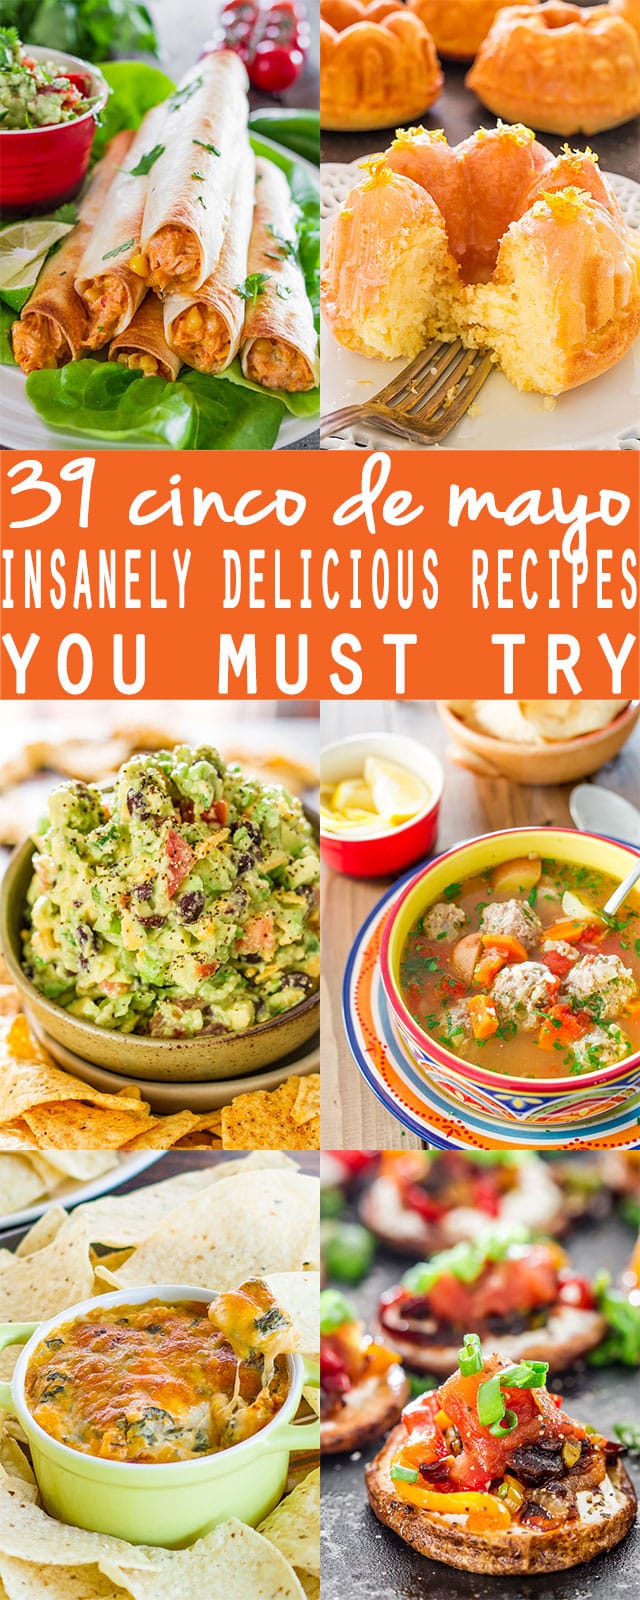 39 Cinco De Mayo Insanely Delicious Recipes You Must Try - your search for Cinco de Mayo recipes is officially over!